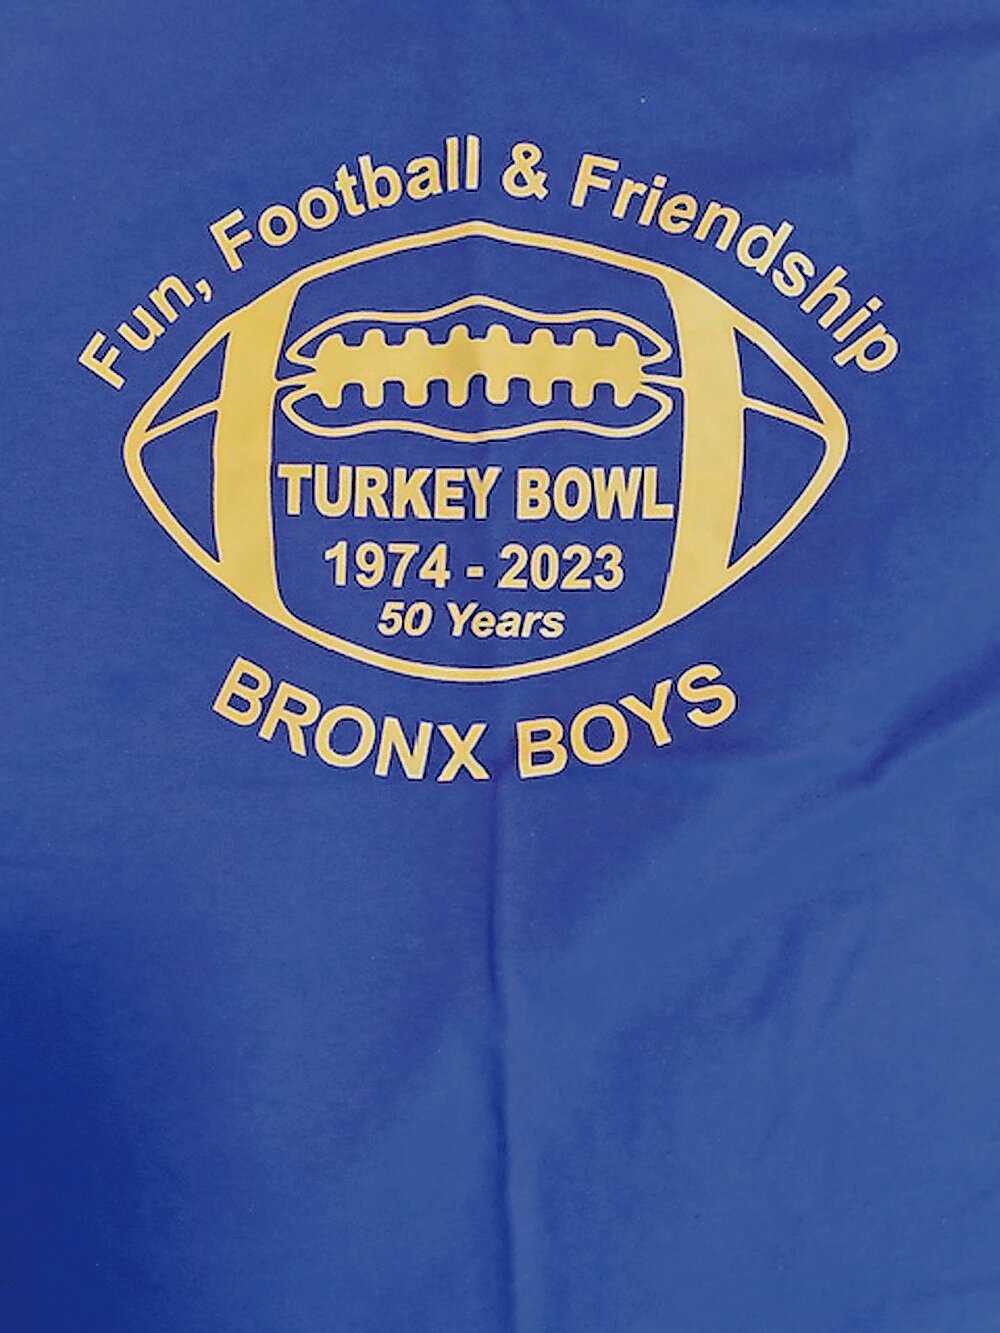 The logo of the 50th anniversary of the Turkey Bowl will adorn the T-shirts the players will wear this year at the Nov. 25 game at Harris Field.